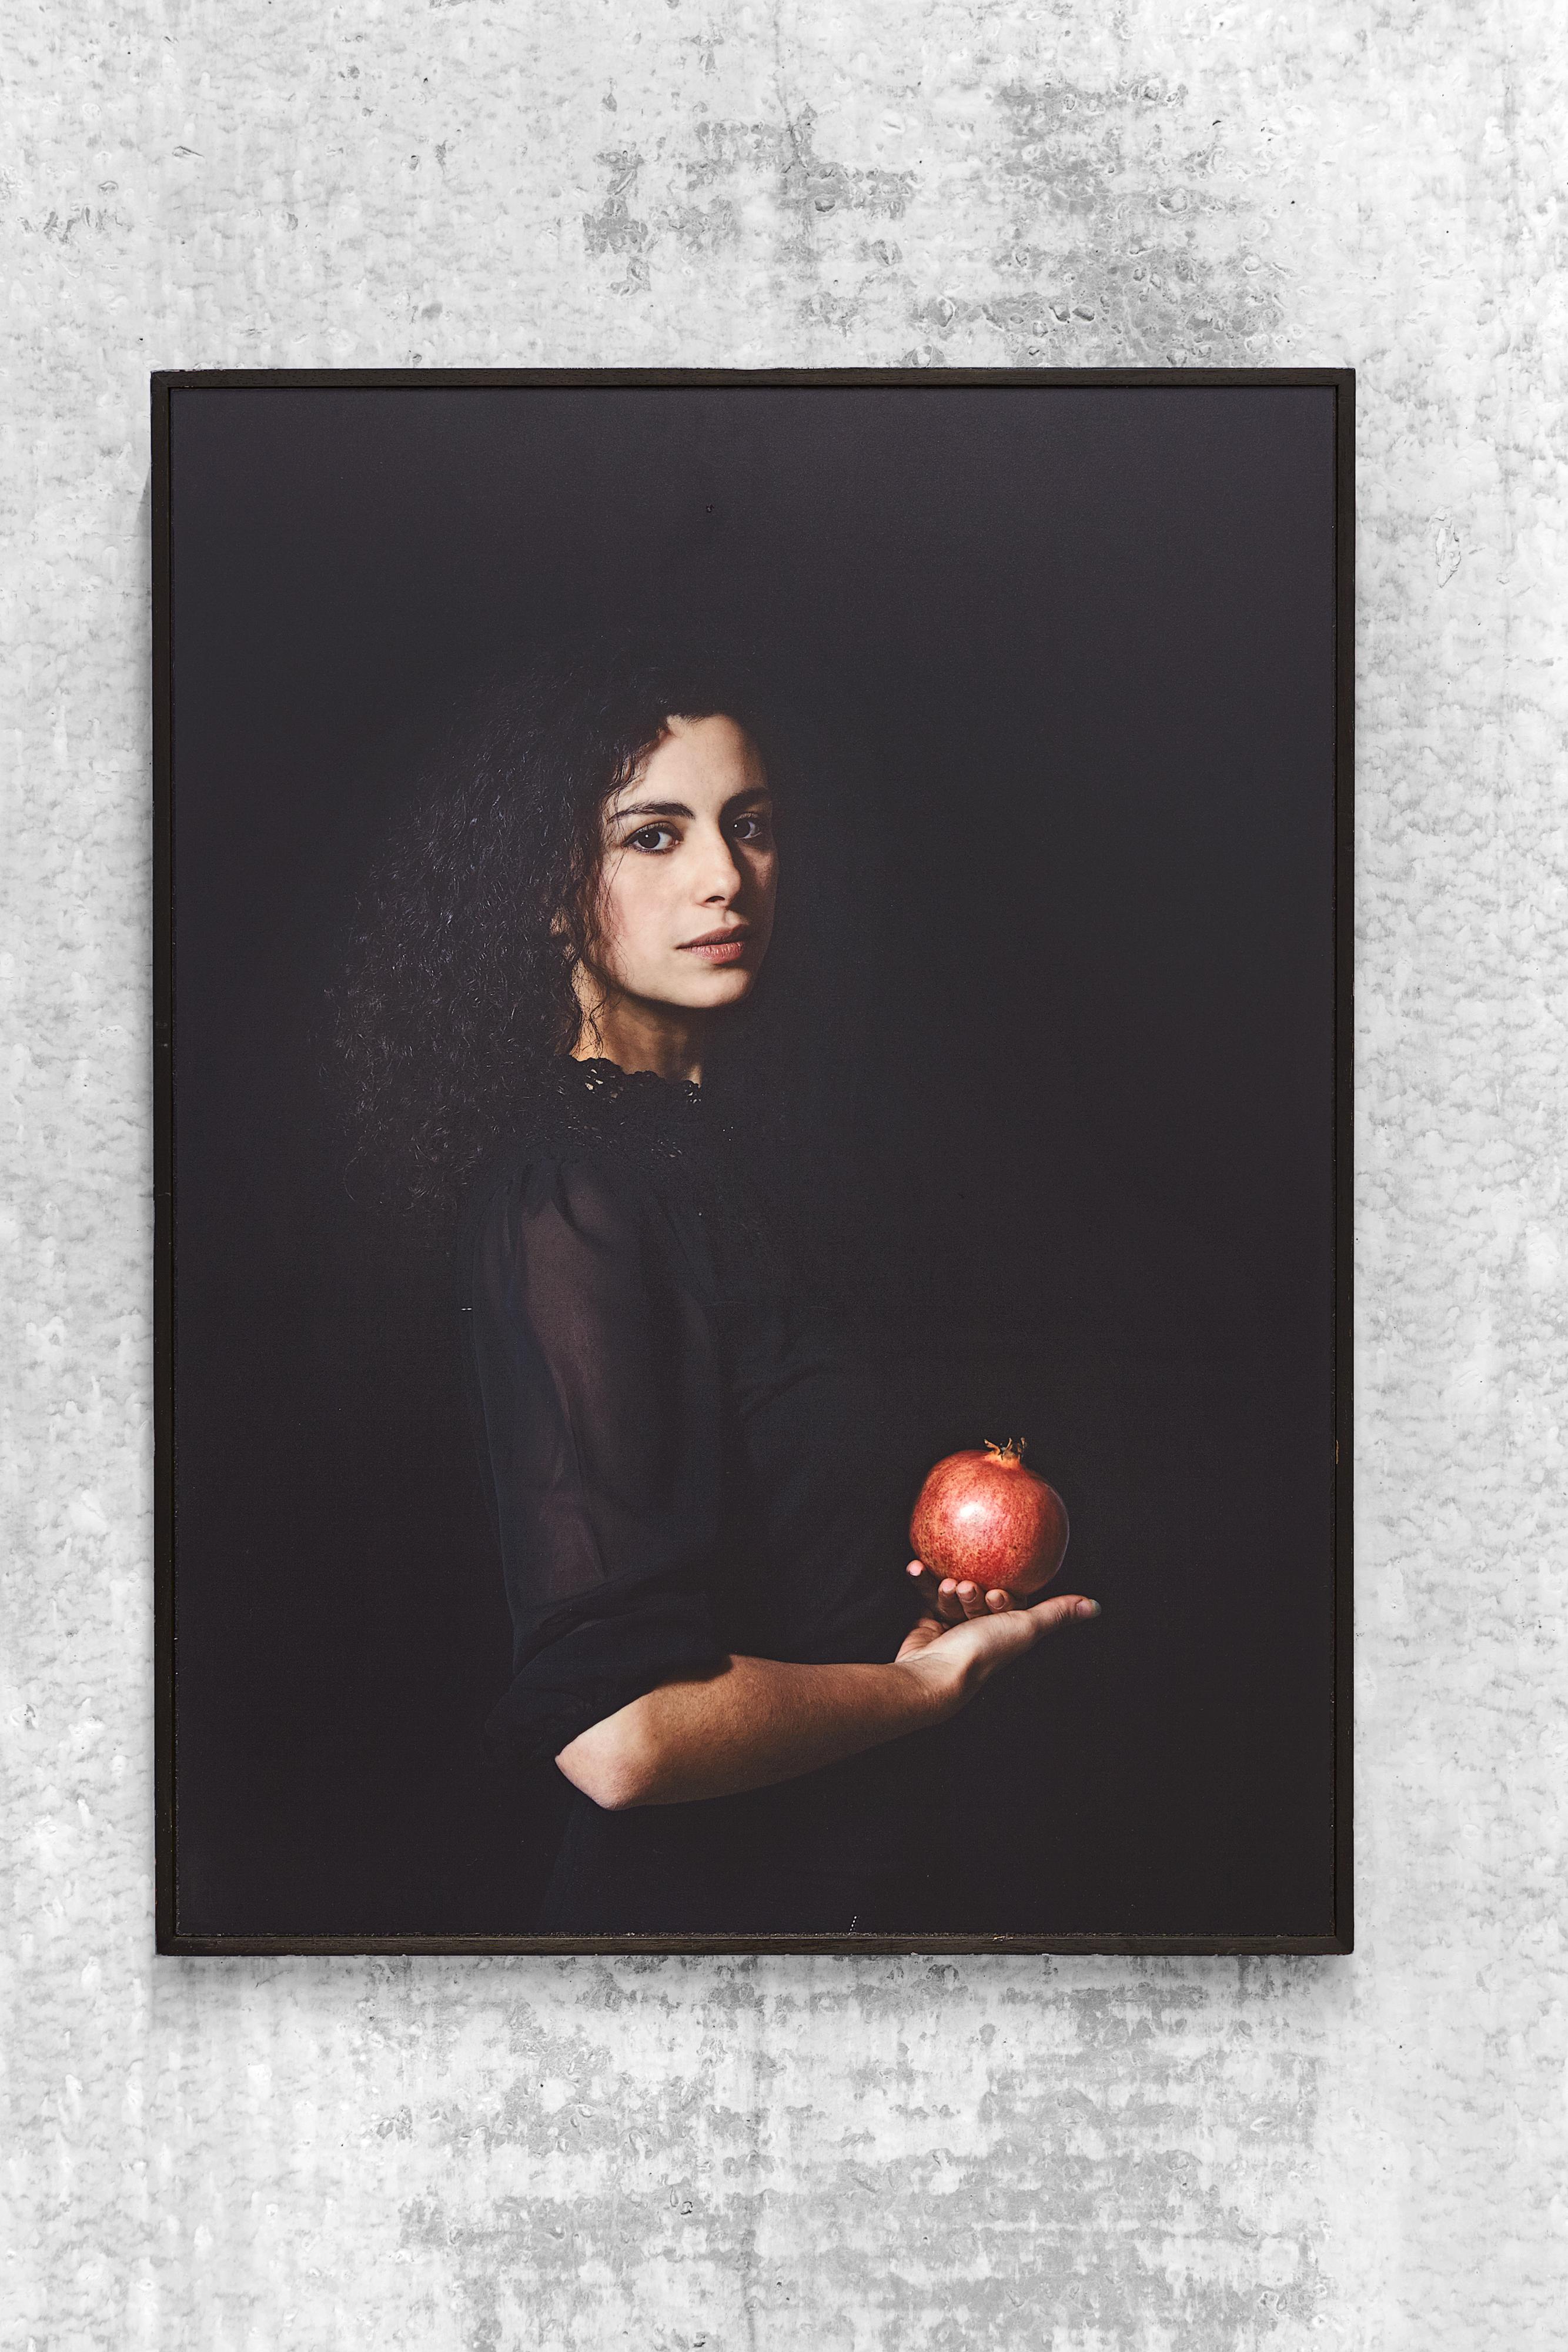 This inspiring portrait of a young lady who's holding a pomegranate is part of a photographic series. The name of the series of special photographic works by the Amsterdam photographer Marie-José van den Ende is 'Lof der schilderkunst' which means